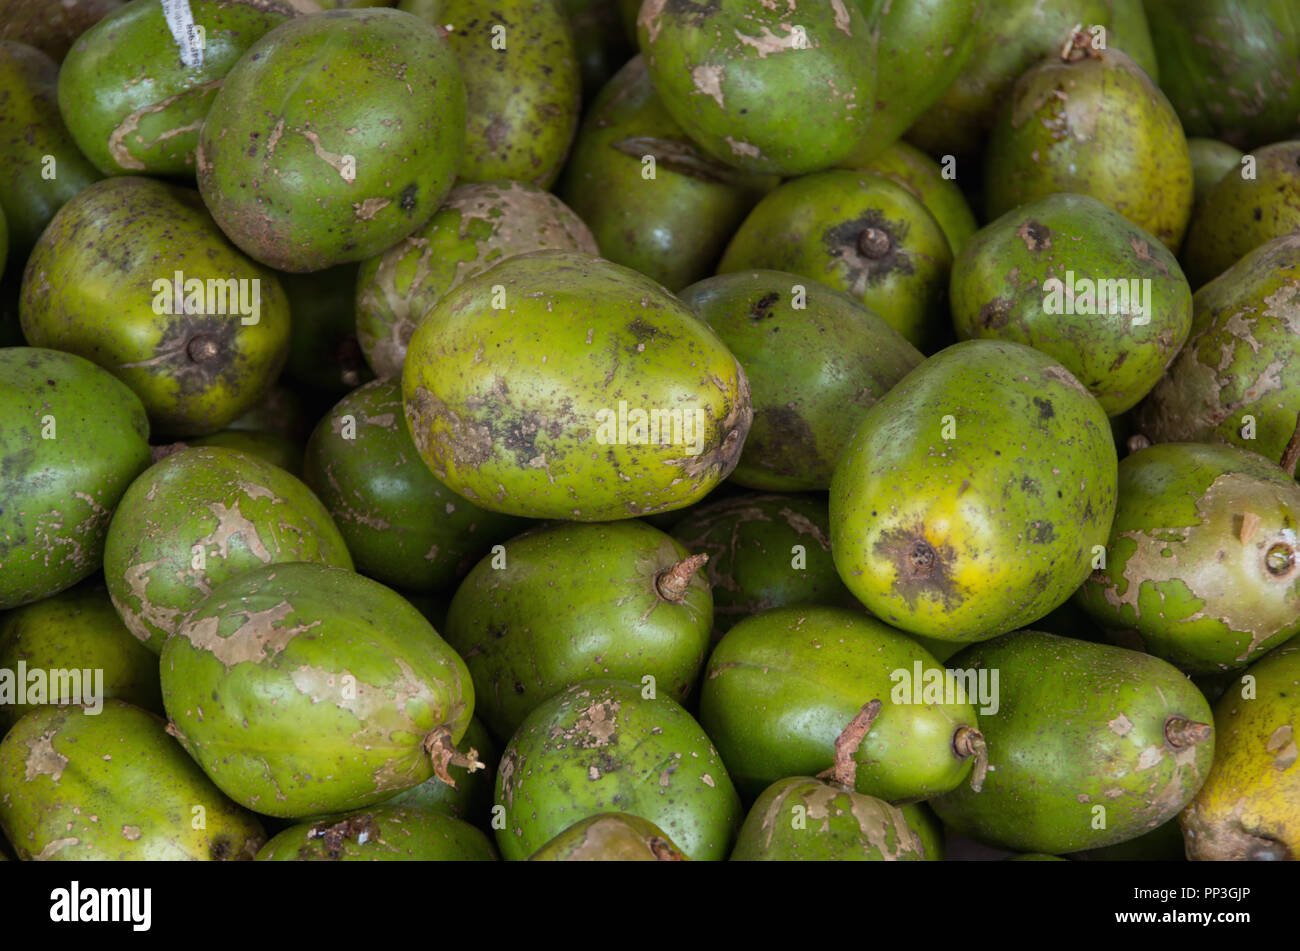 Background with amarelle fruit in the asia market, picture use for design, advertising, marketing, business and printing Stock Photo